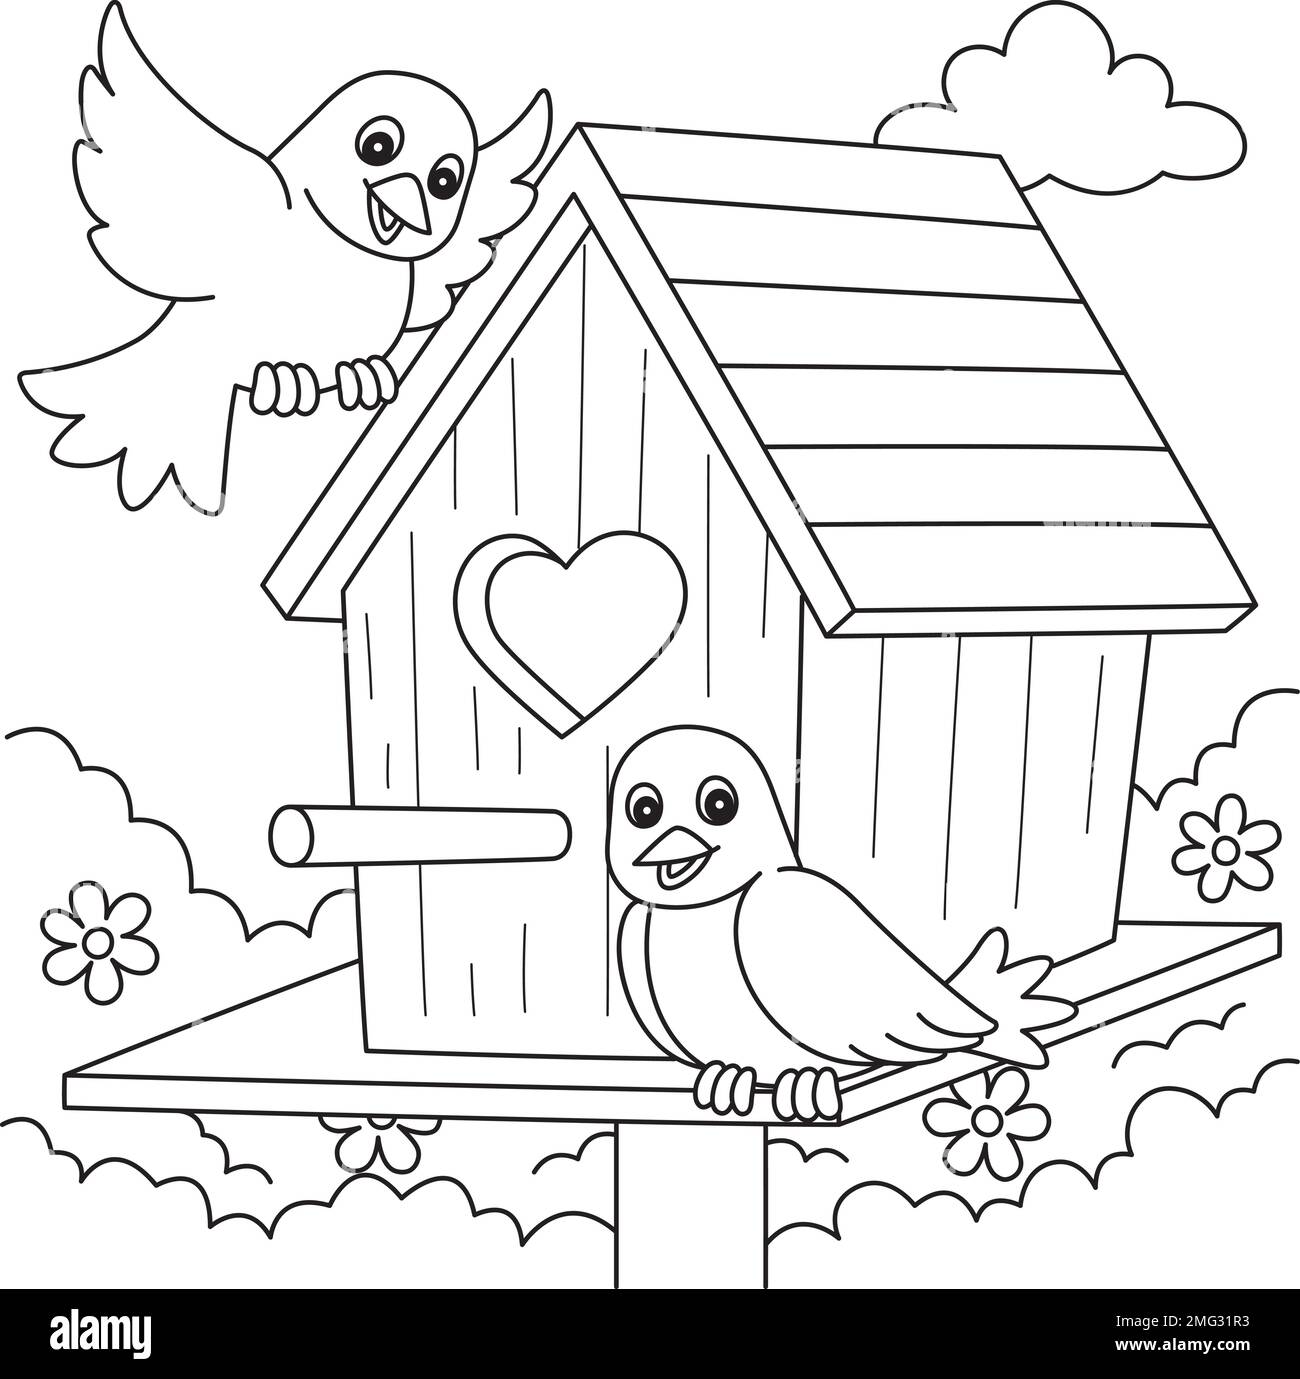 Spring Birdhouse Coloring Page for Kids Stock Vector